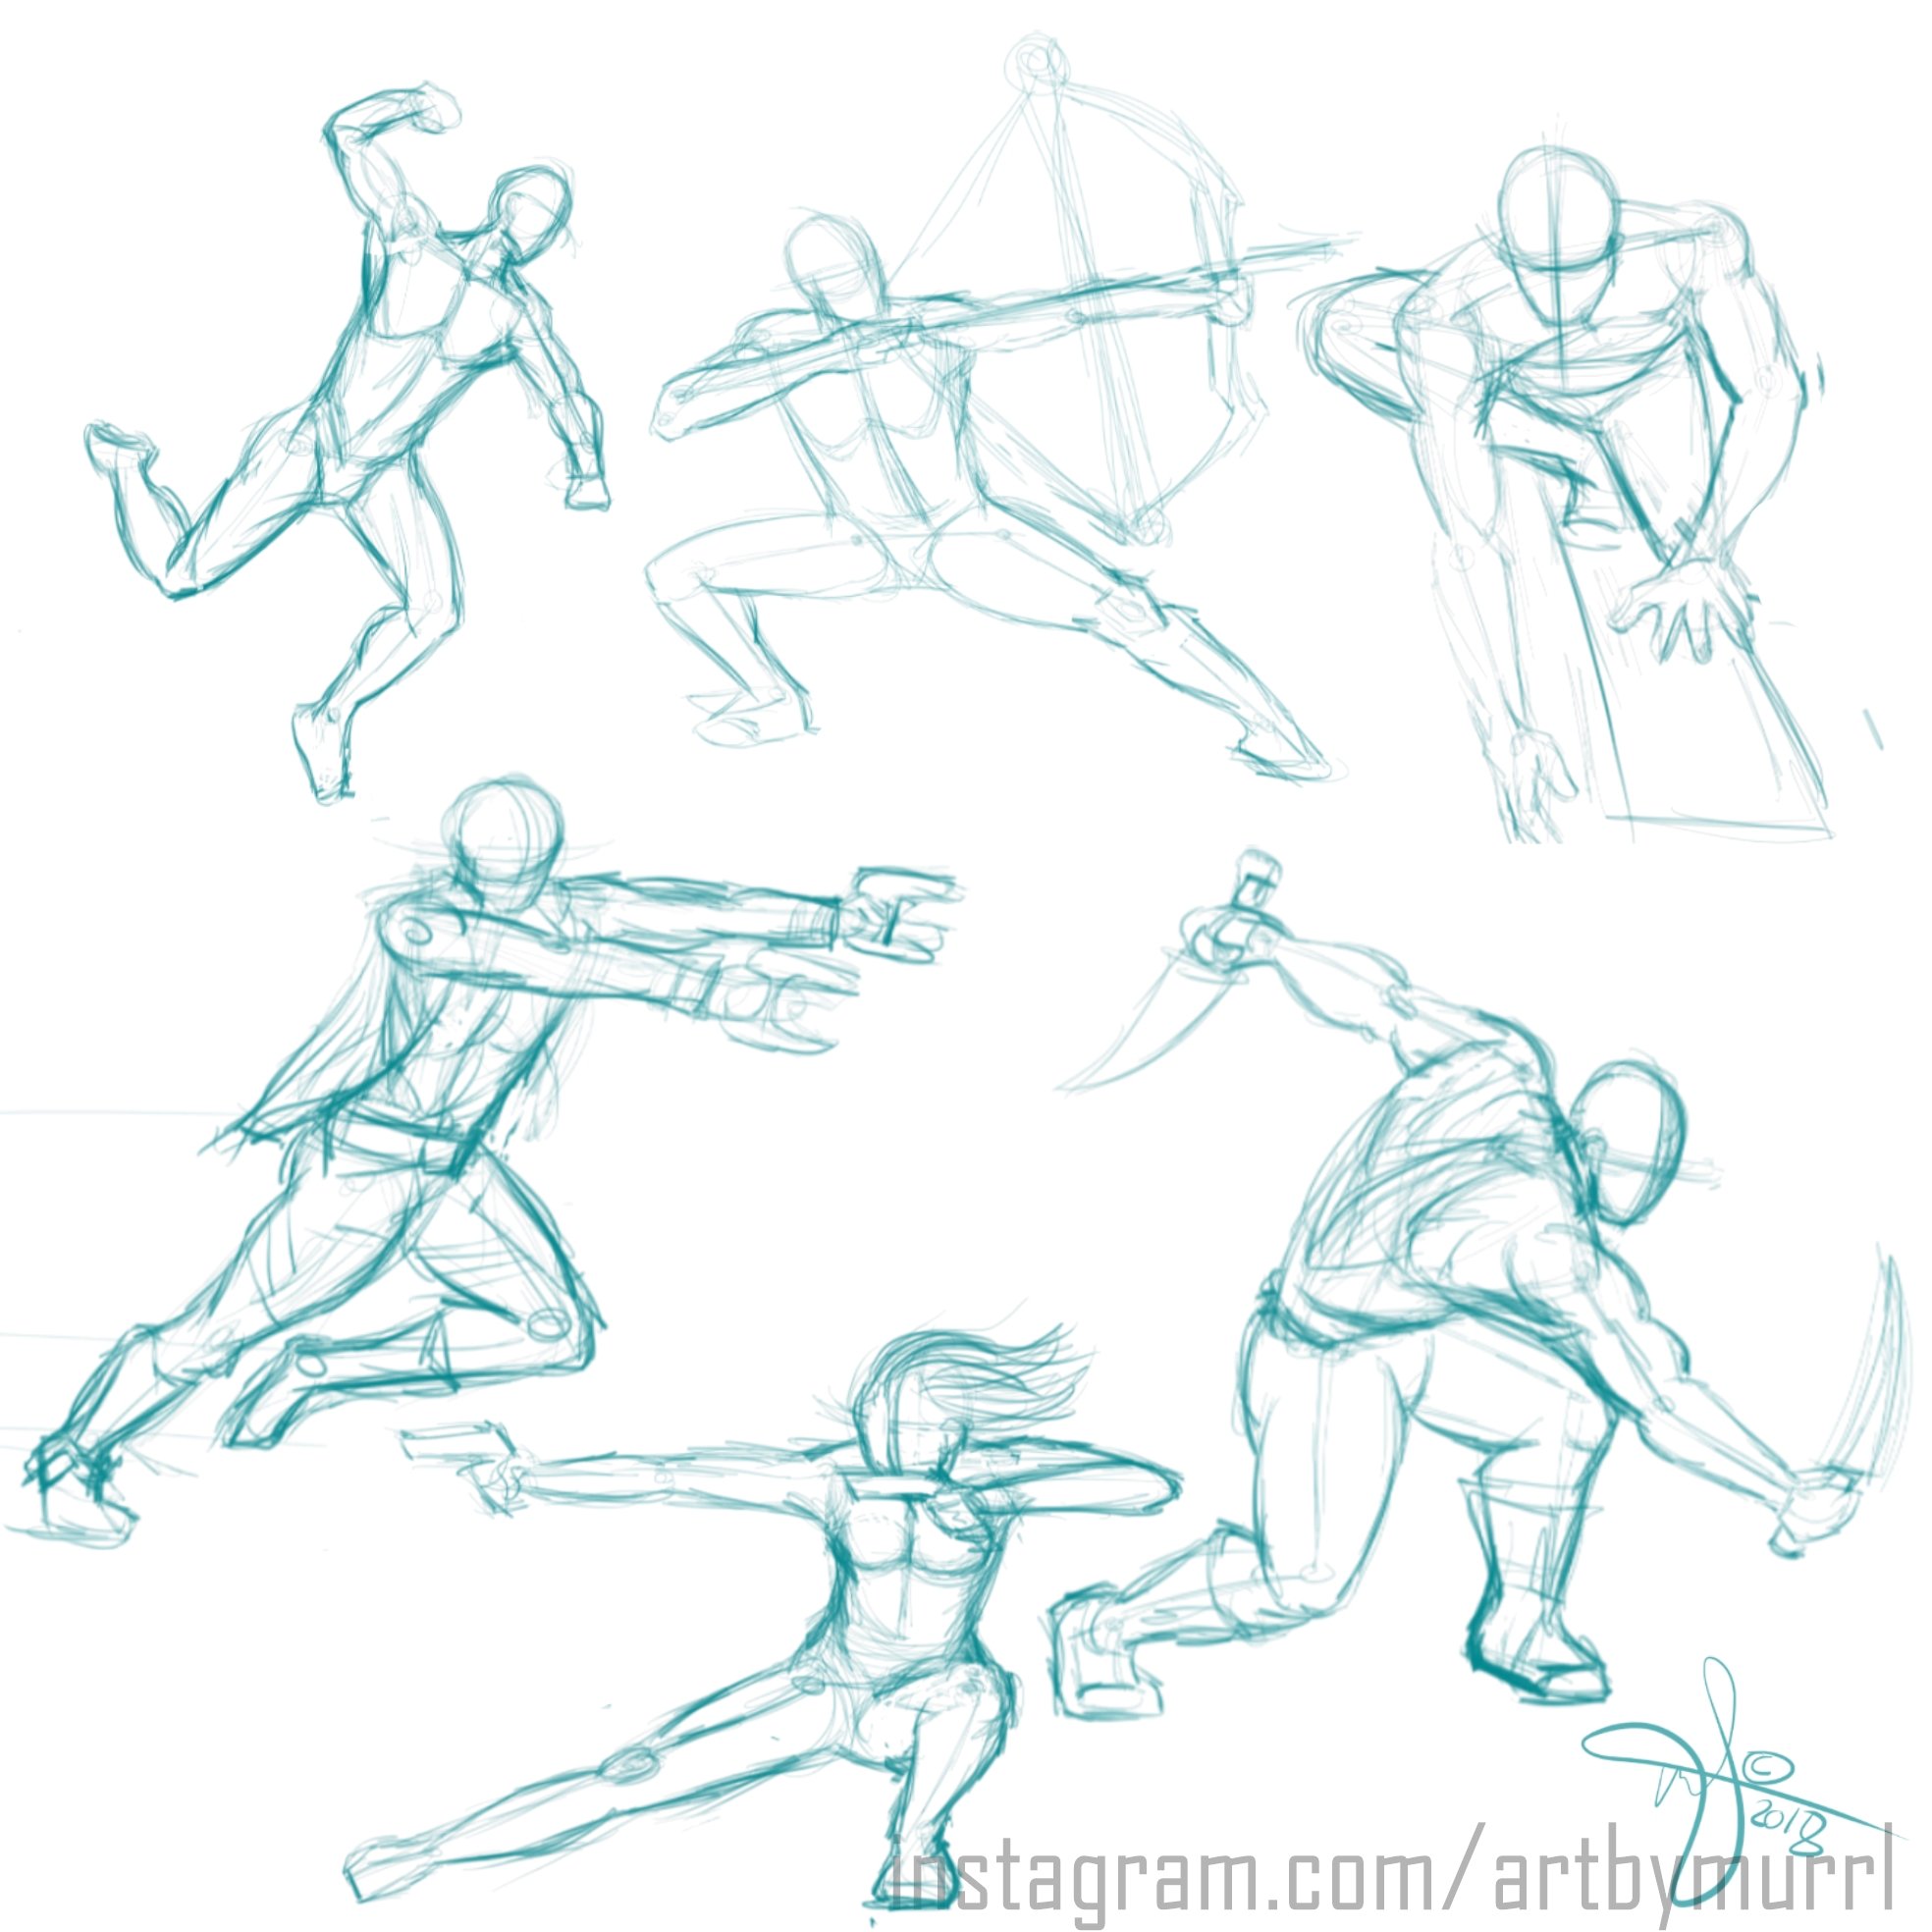 How to get better at drawing poses - Body Kun Dolls